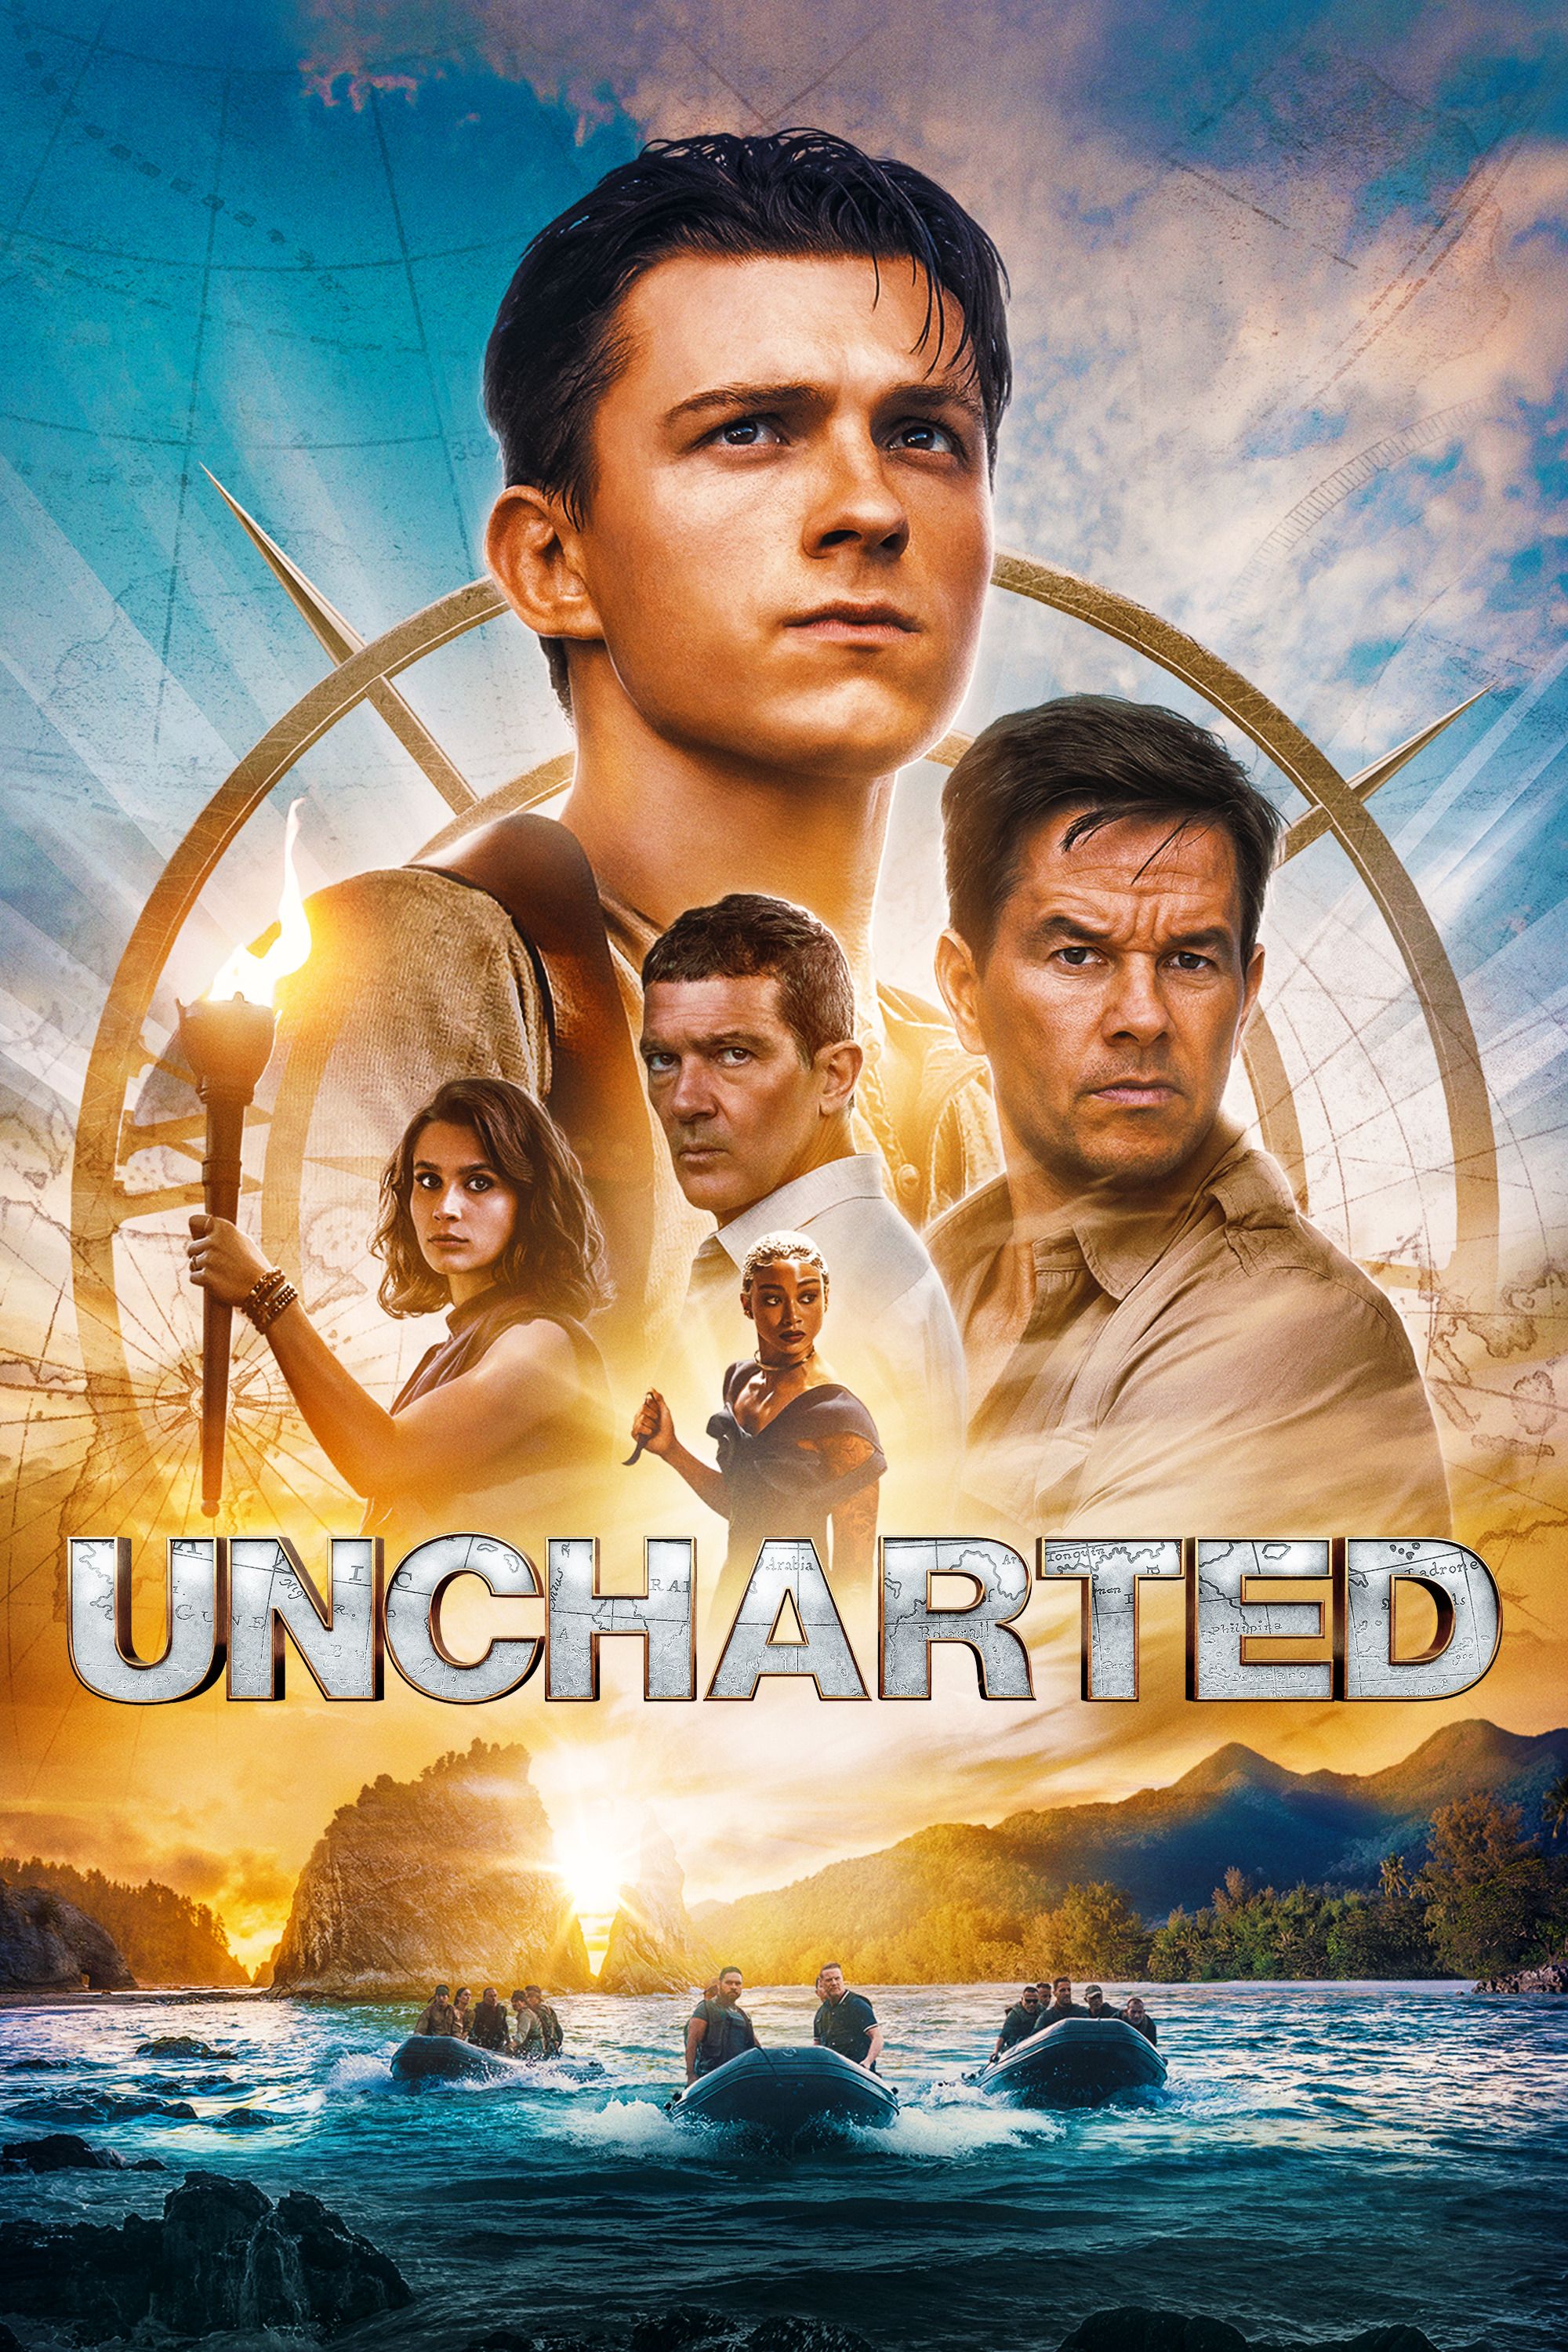 Uncharted Full Movie Free Download